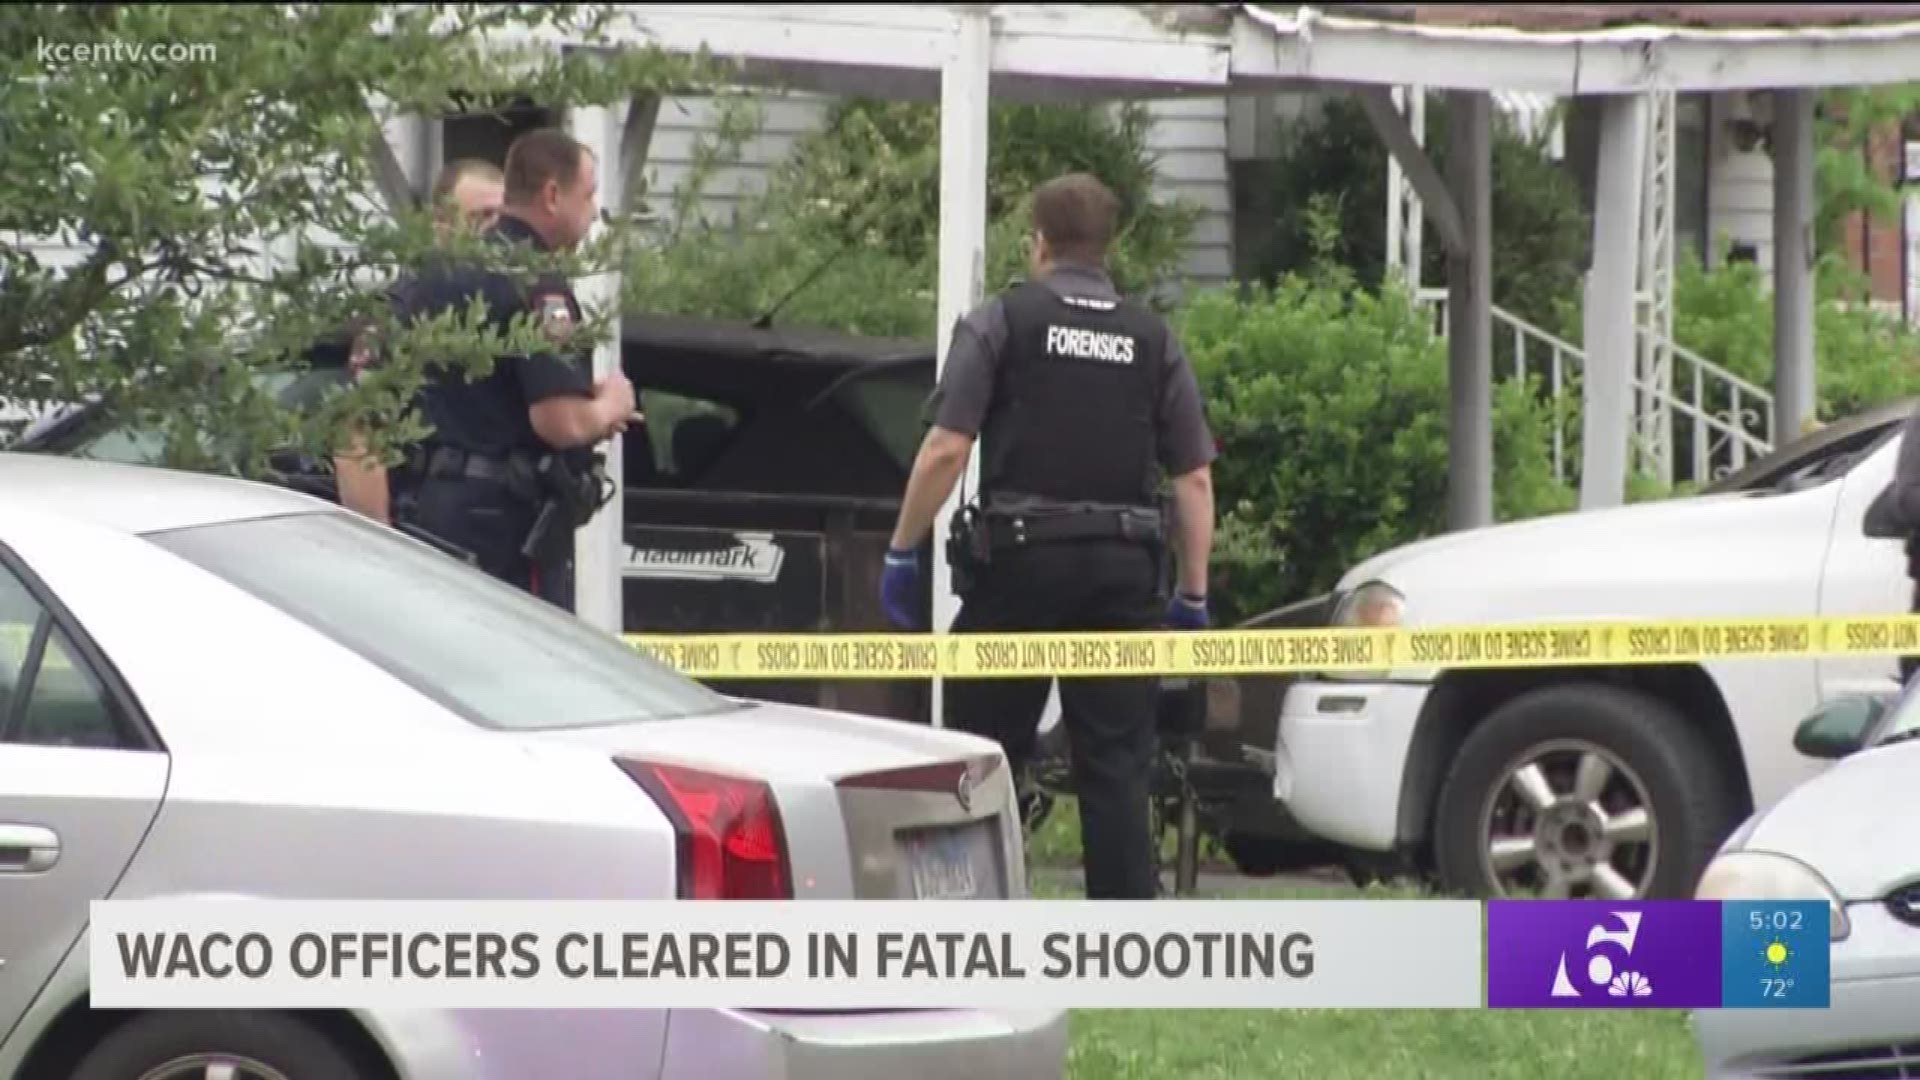 An update on a fatal officer-involved shooting in Waco.